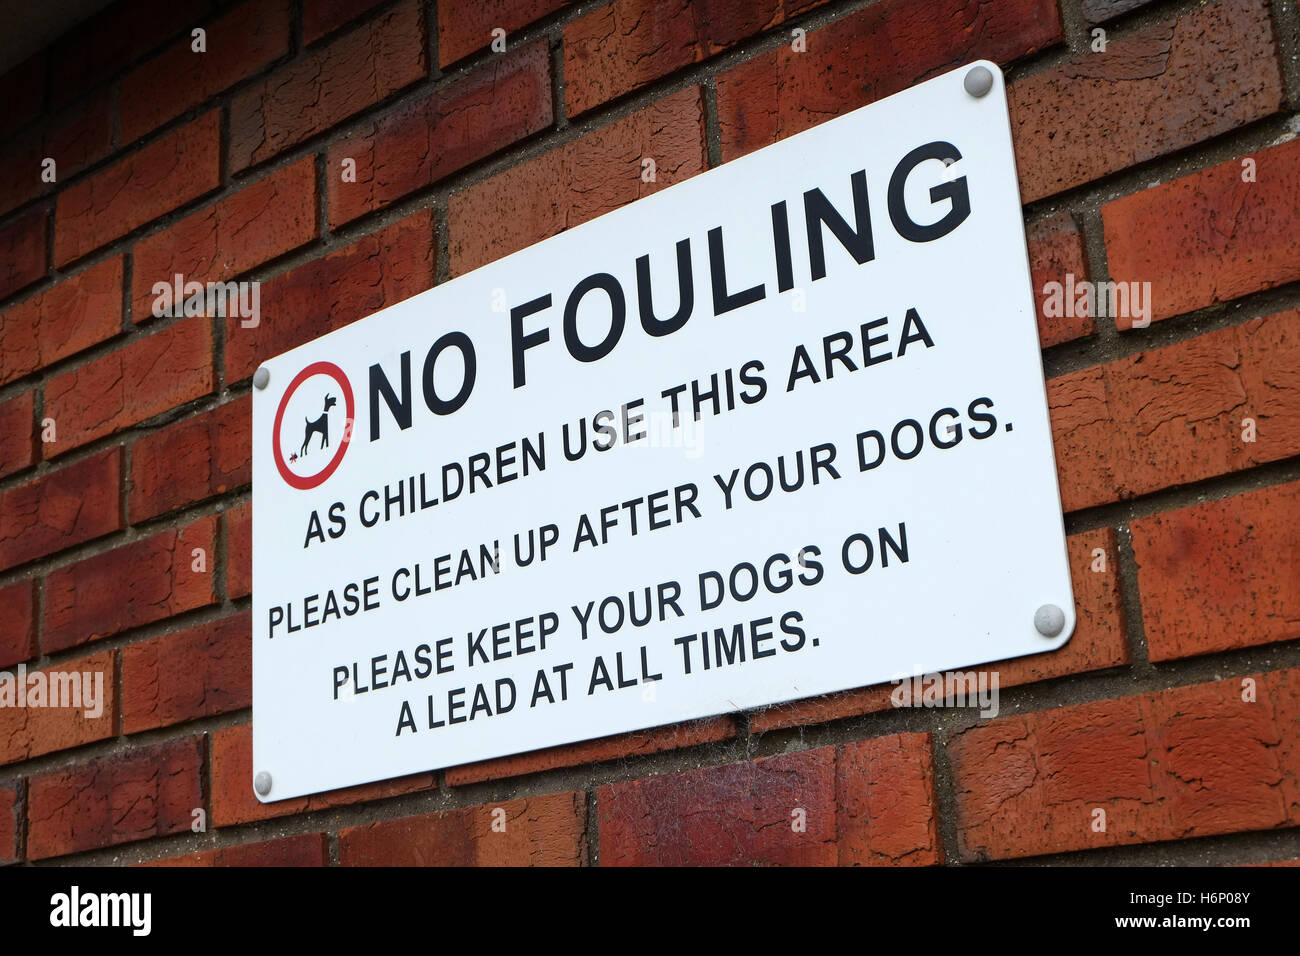 No fouling sign for dog owners in public place. Stock Photo